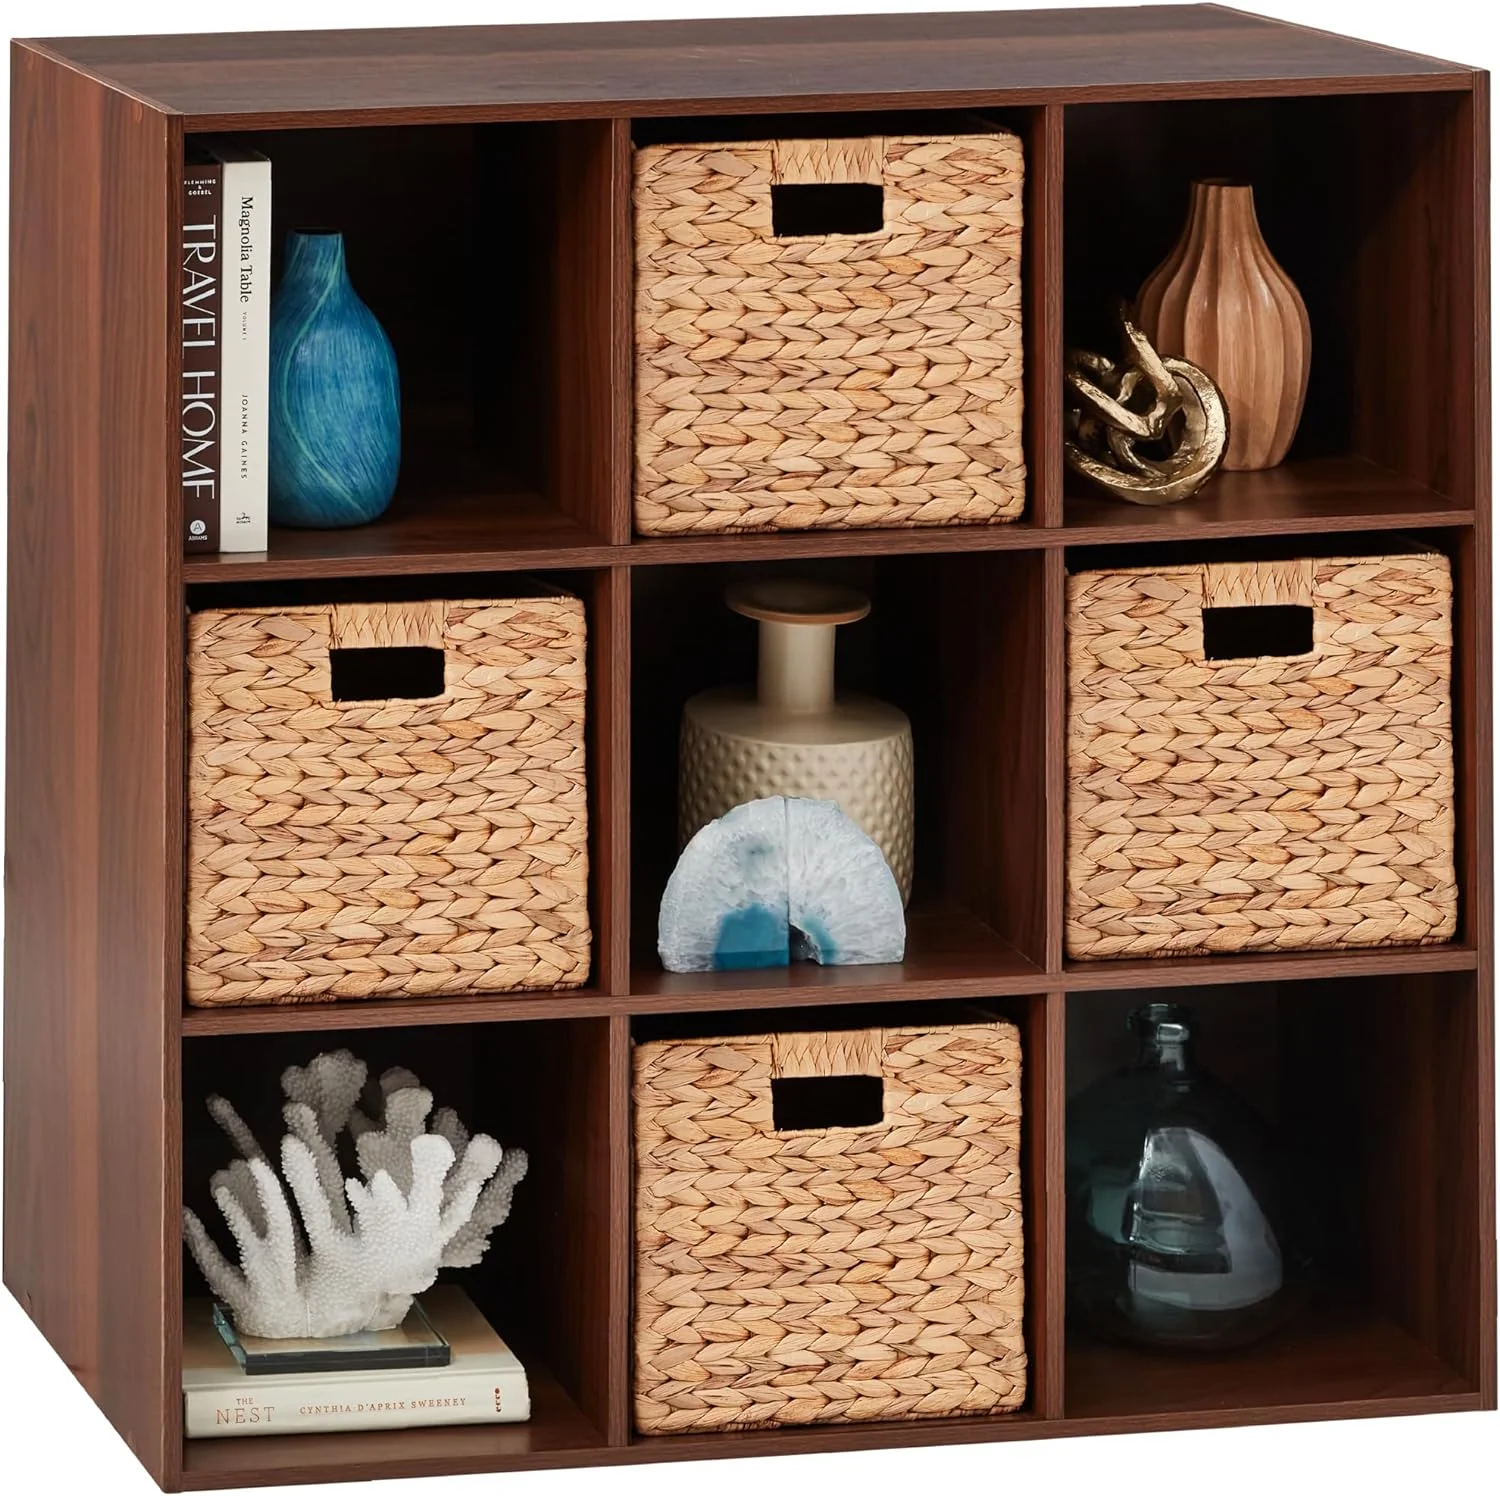 Best Choice Products 9-Cube Storage Shelf Organizer Review